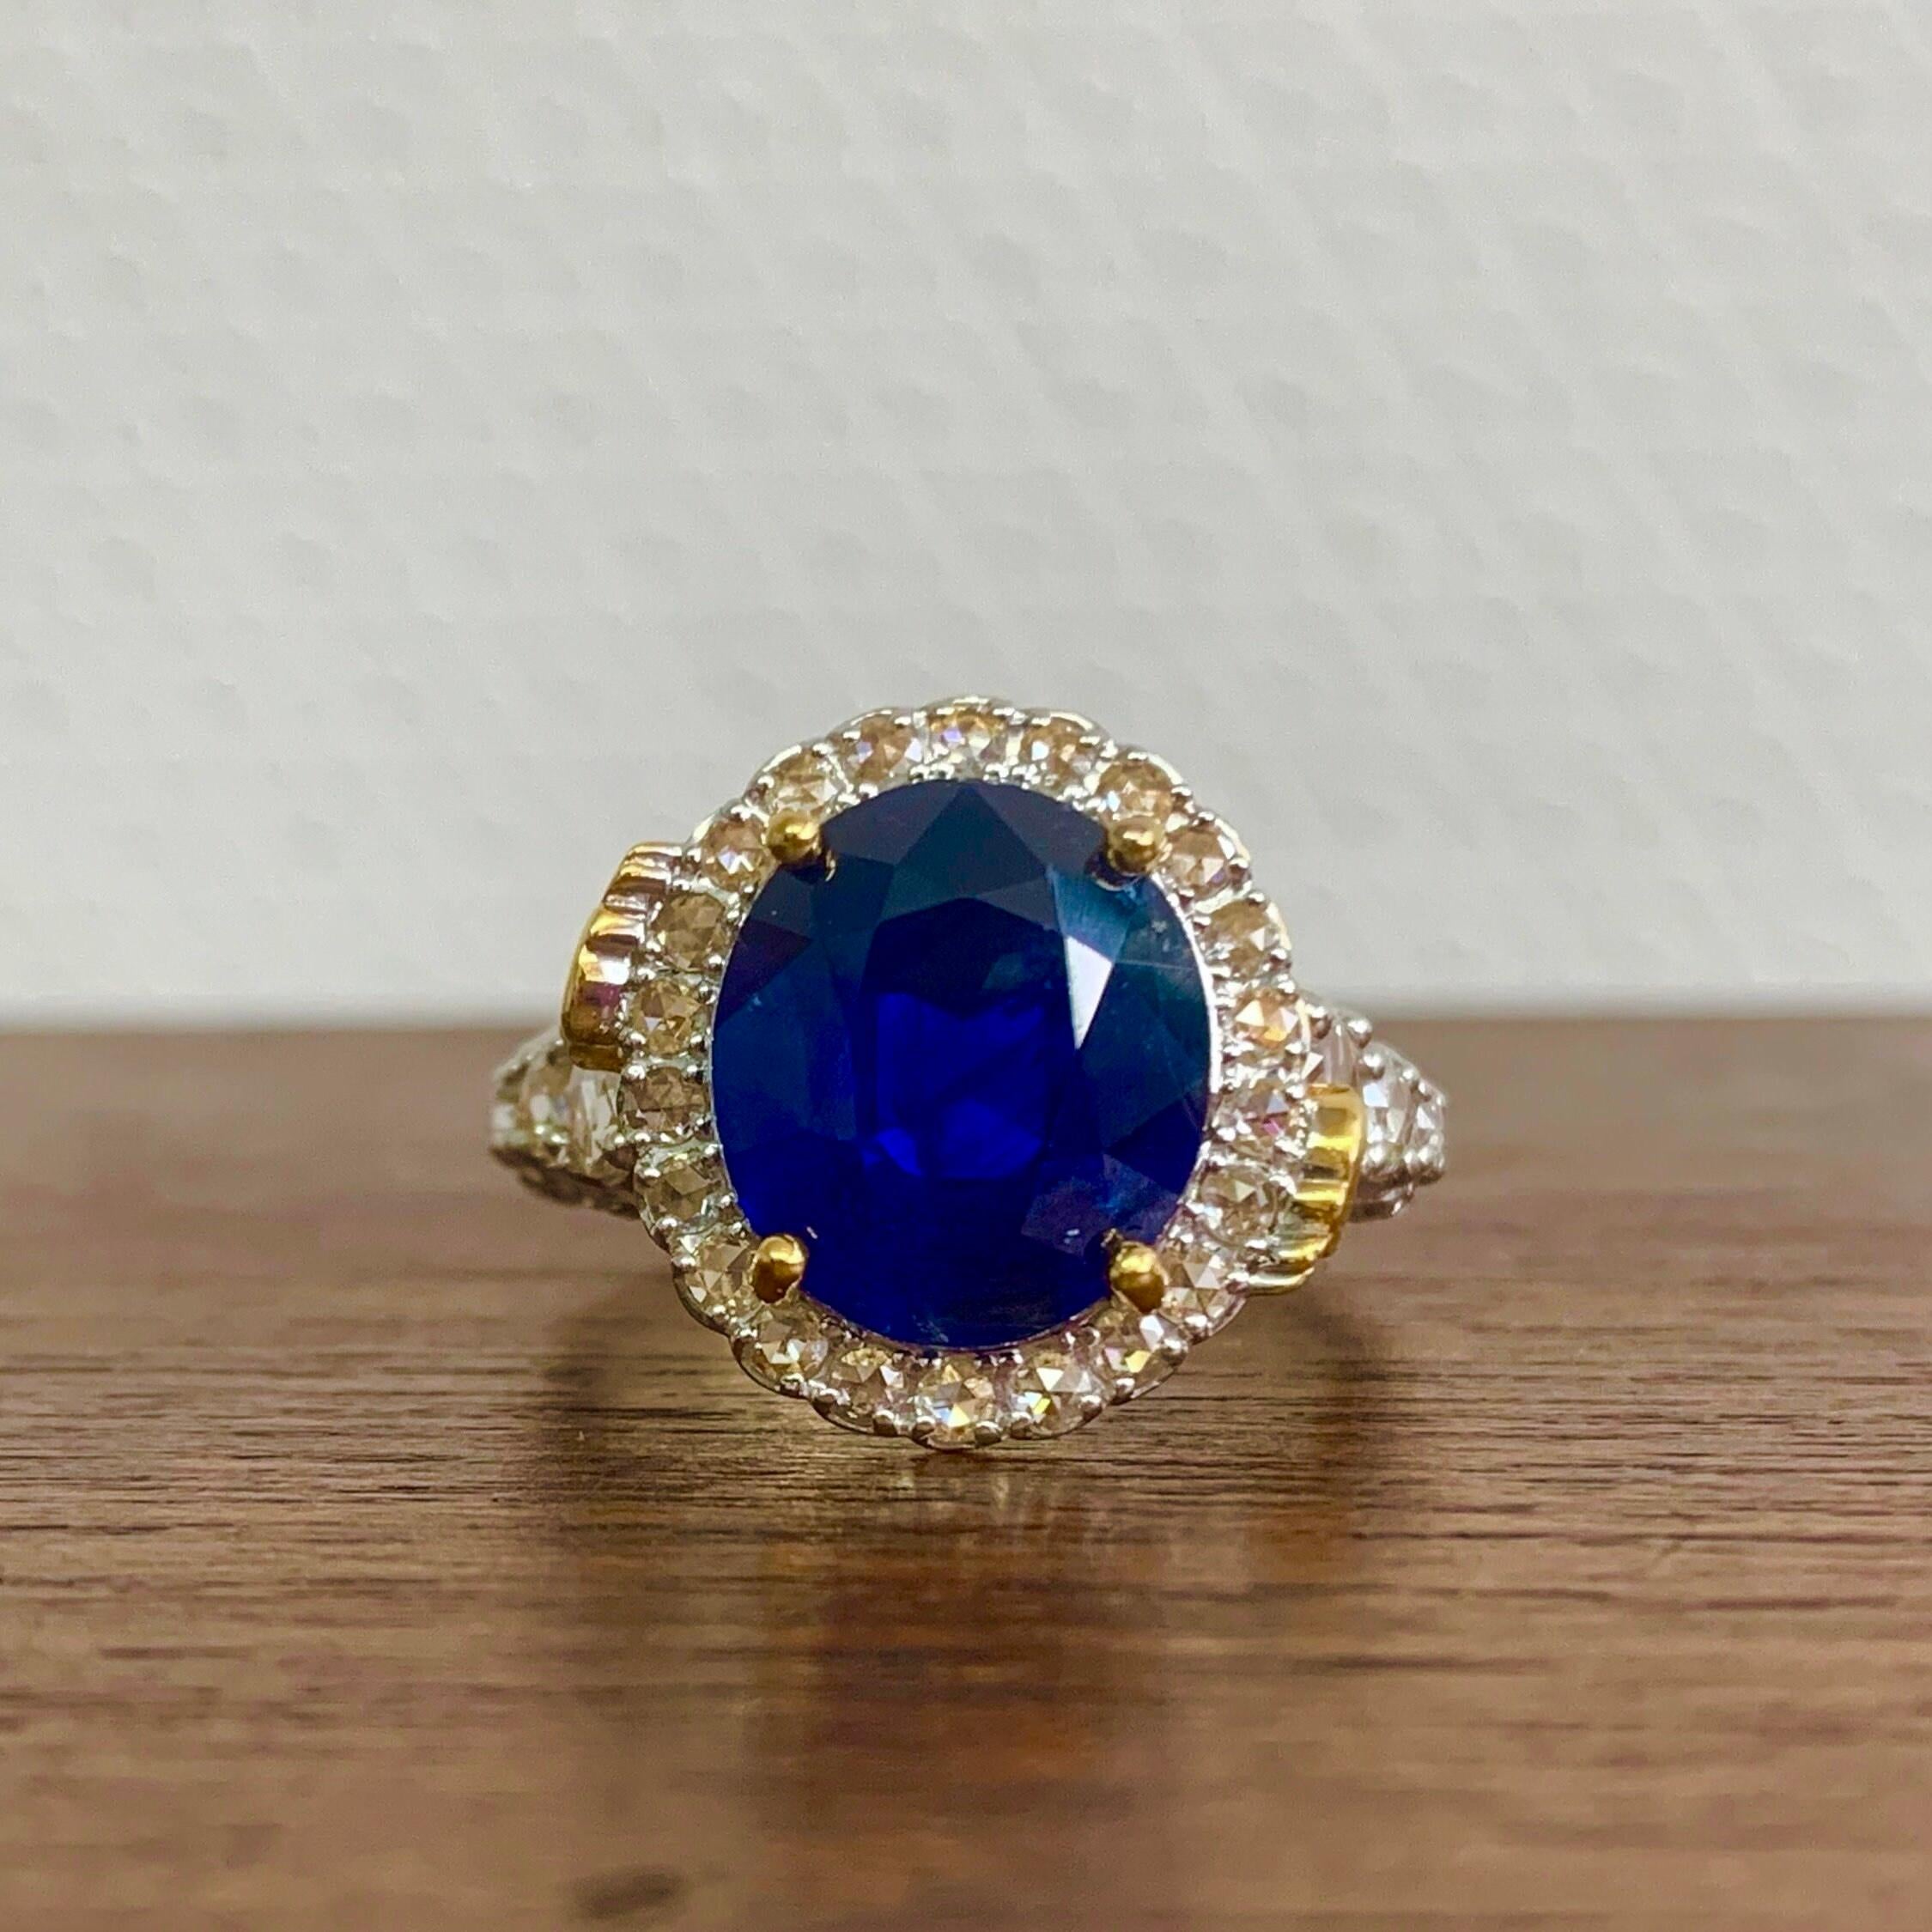 Indulge in the allure of exquisite jewelry with this captivating Ceylon Sapphire ring, a treasure that will leave all vintage jewelry enthusiasts and sapphire lovers delighted. Ceylon Sapphires, known for their extraordinary beauty, are among the